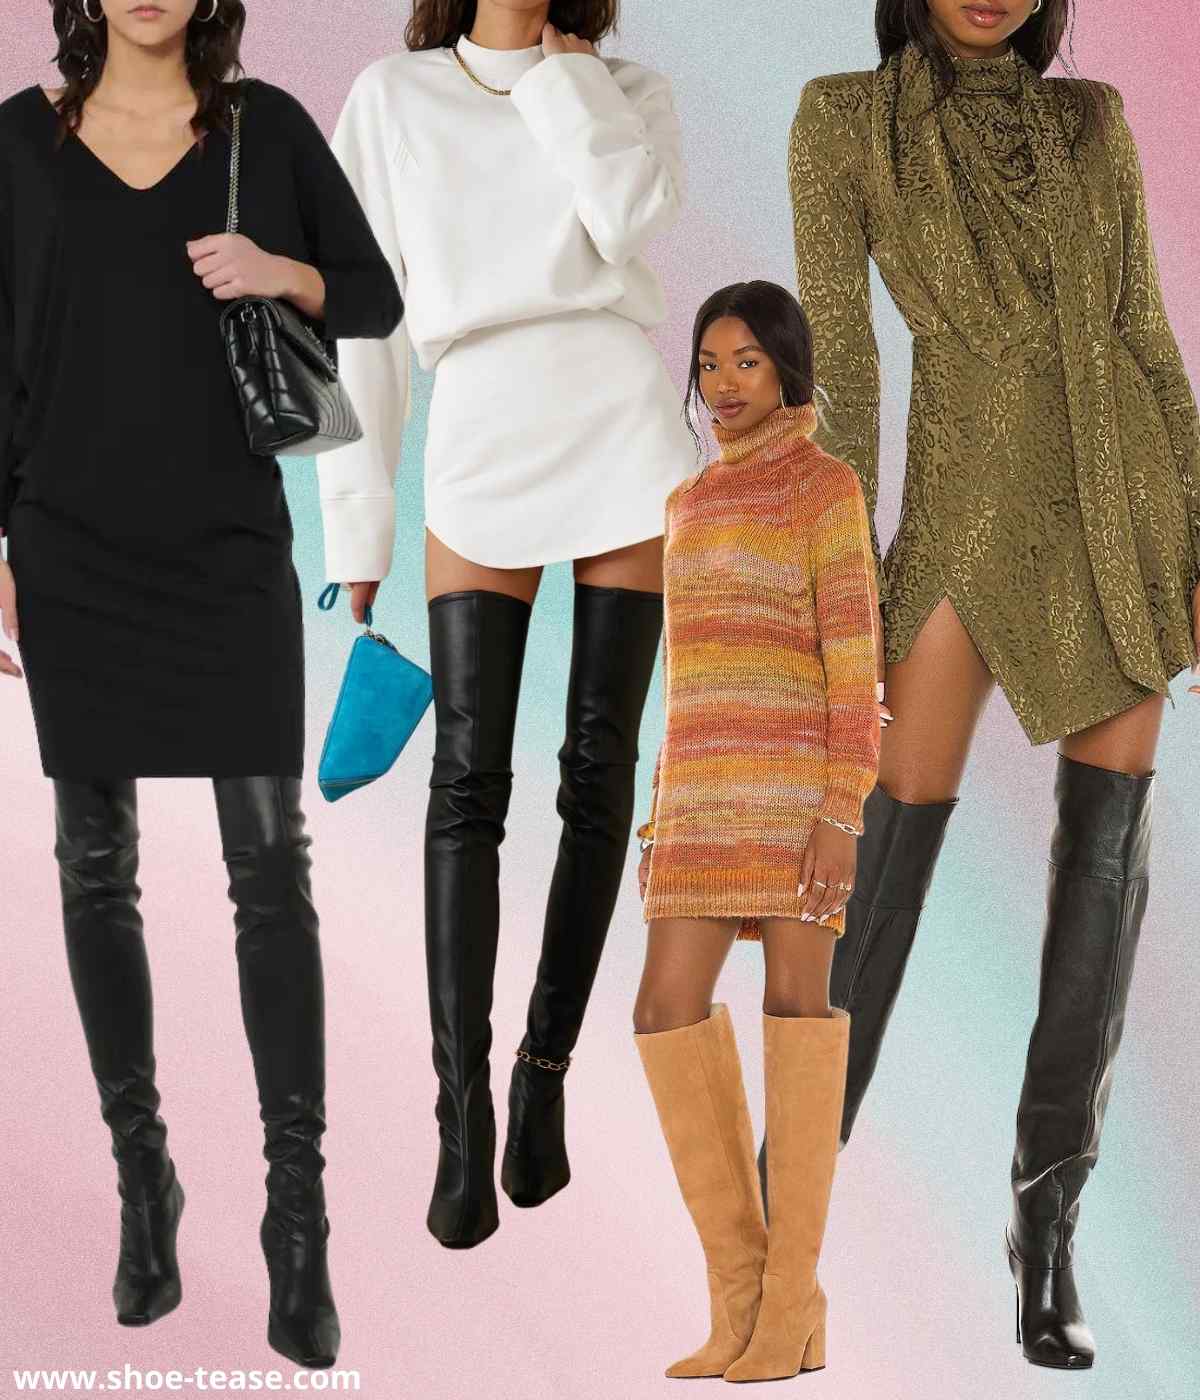 4 women wearing different mini dresses with tall boots.